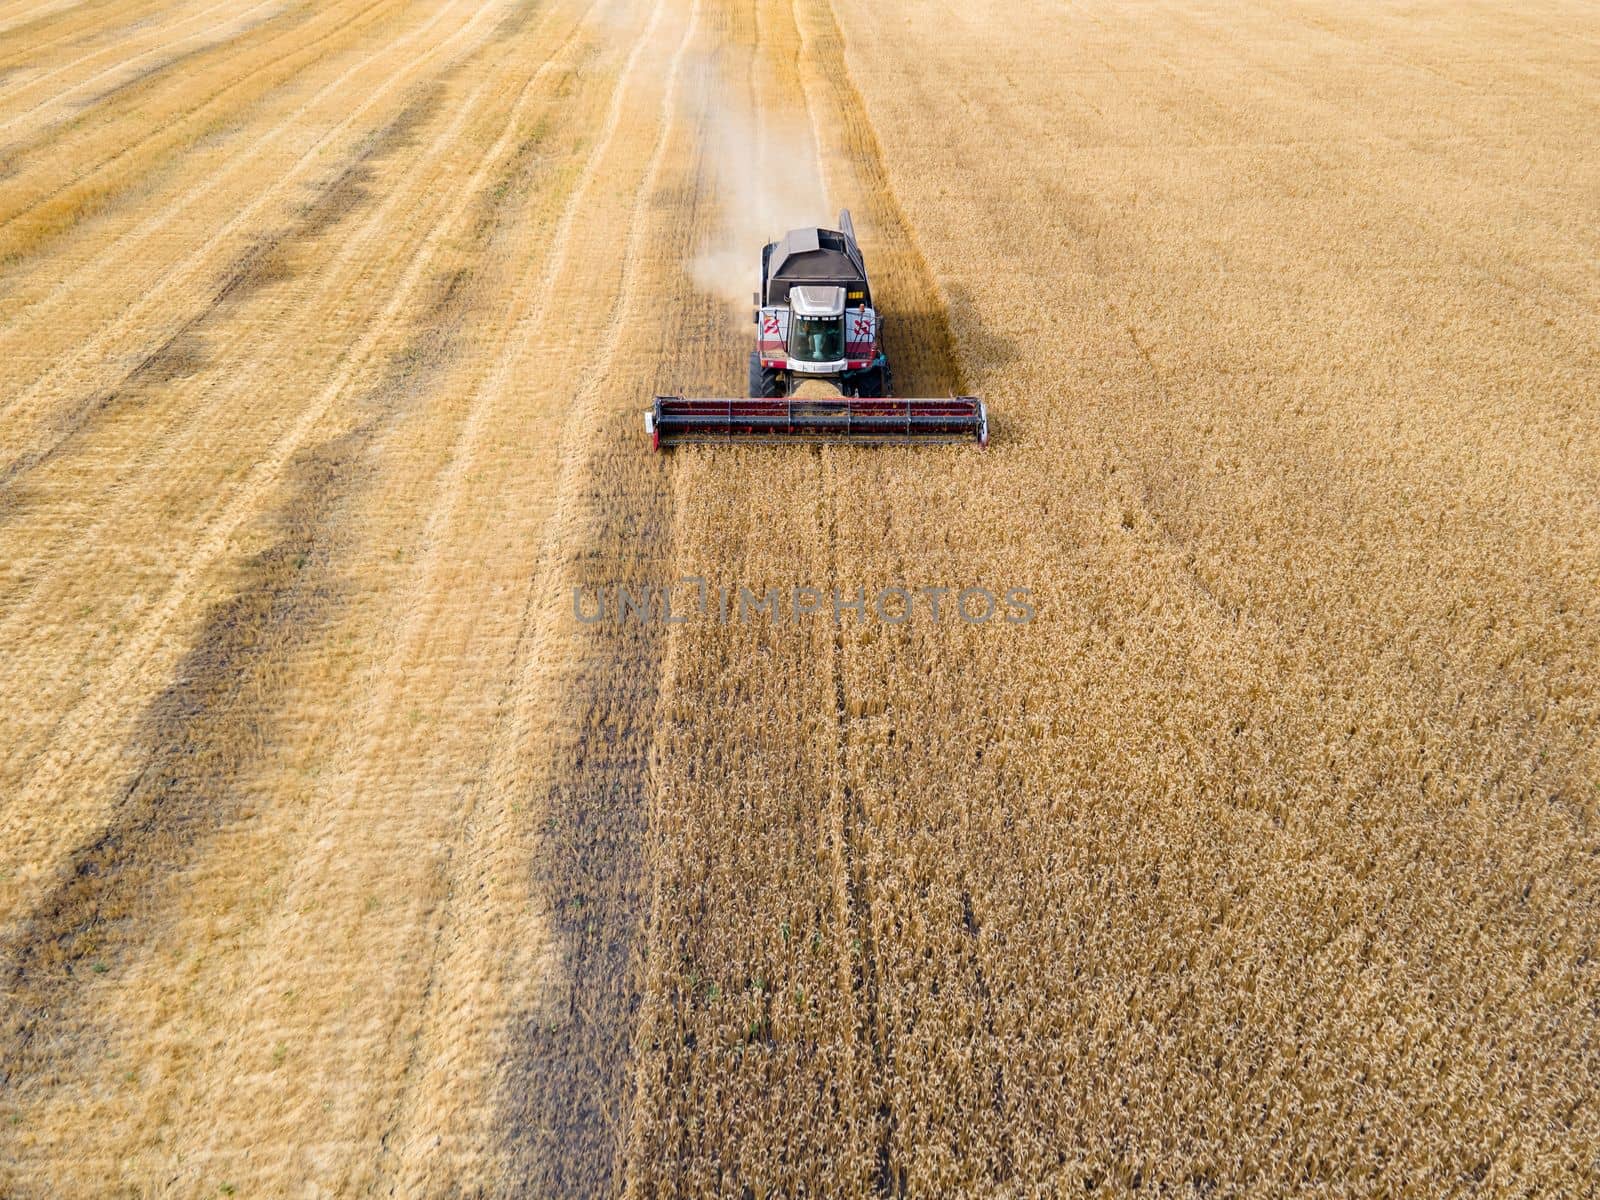 Combines mow wheat in the field.Agro-industry.Combine Harvester Cutting on wheat field.Machine harvest wheat.Harvesting of grain crops.Harvesting wheat,oats and barley in fields,ranches and farmlands by YevgeniySam